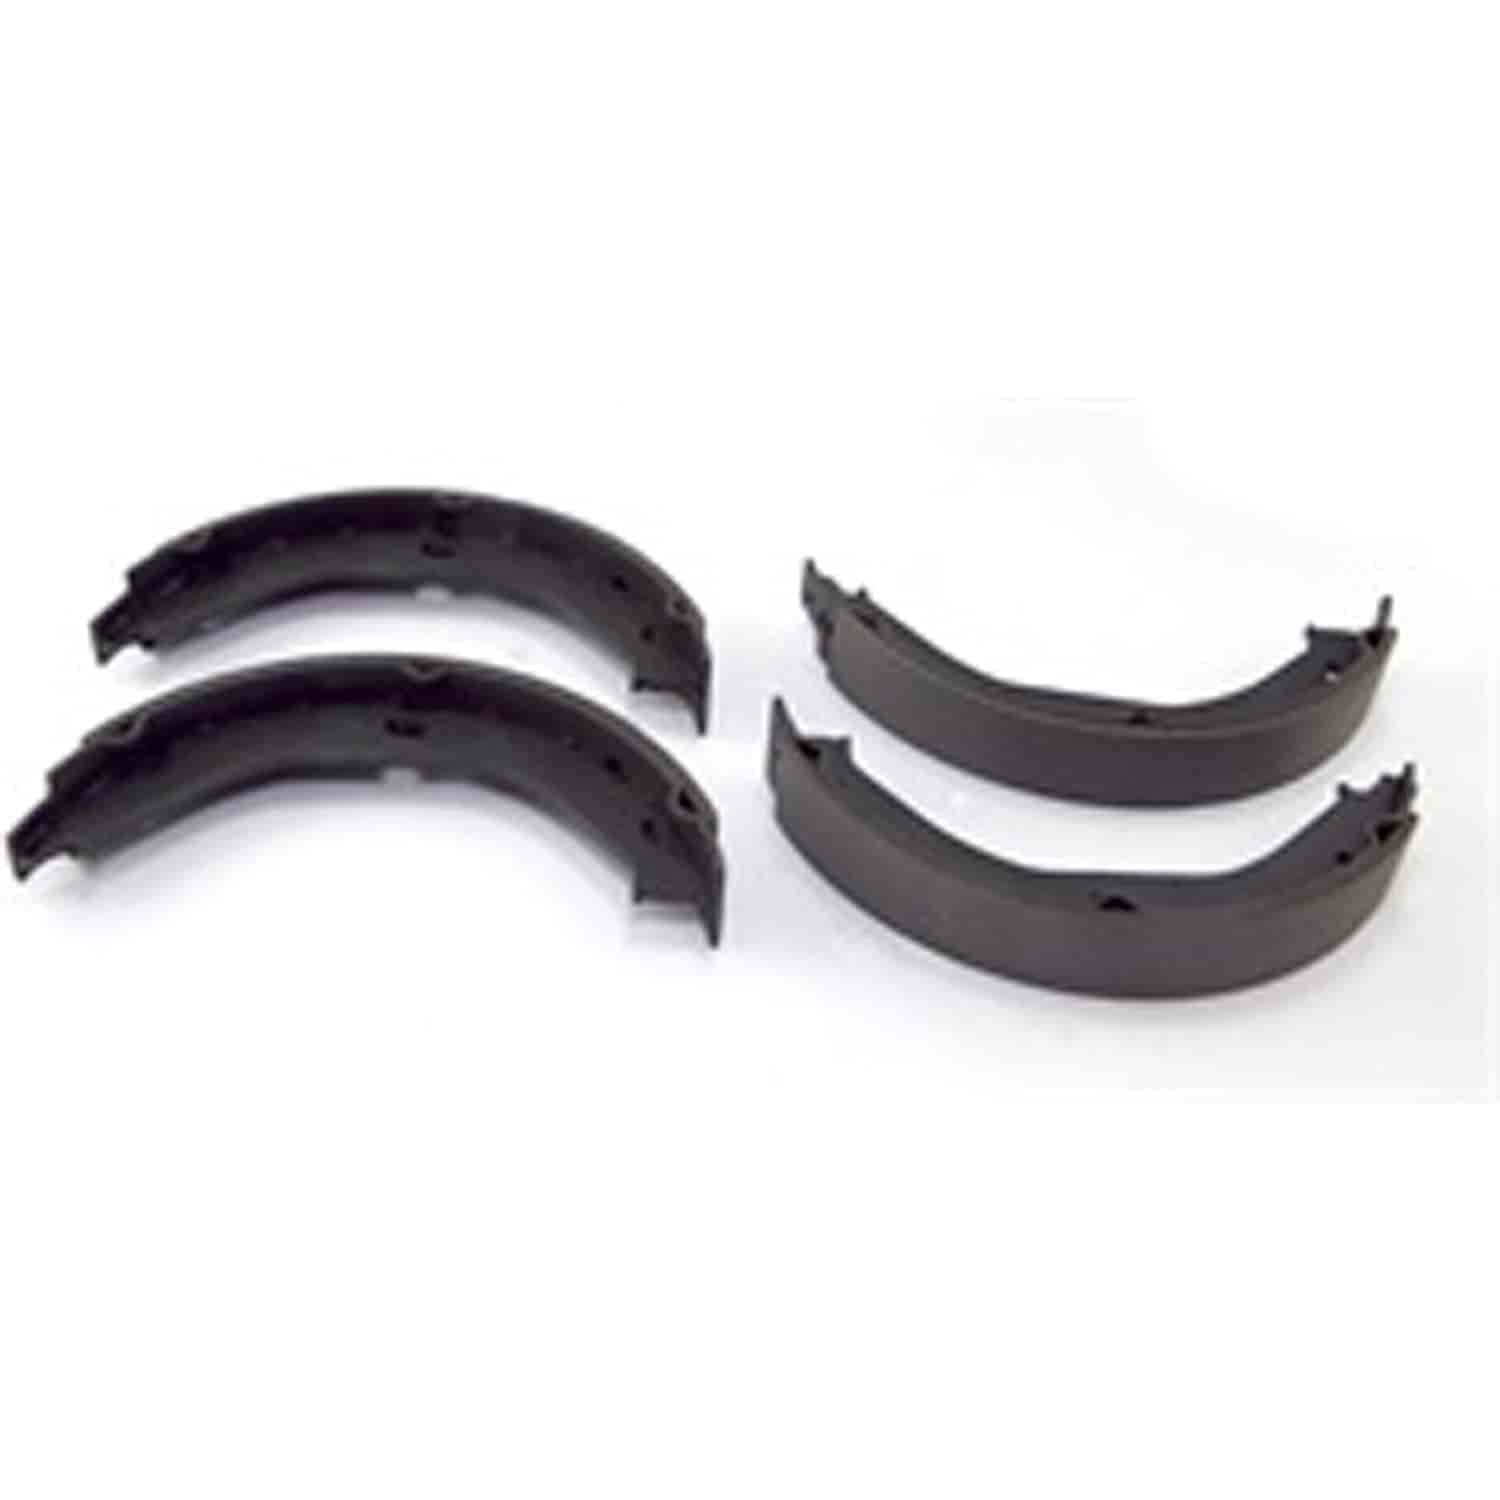 This set of rear drum brake shoes from